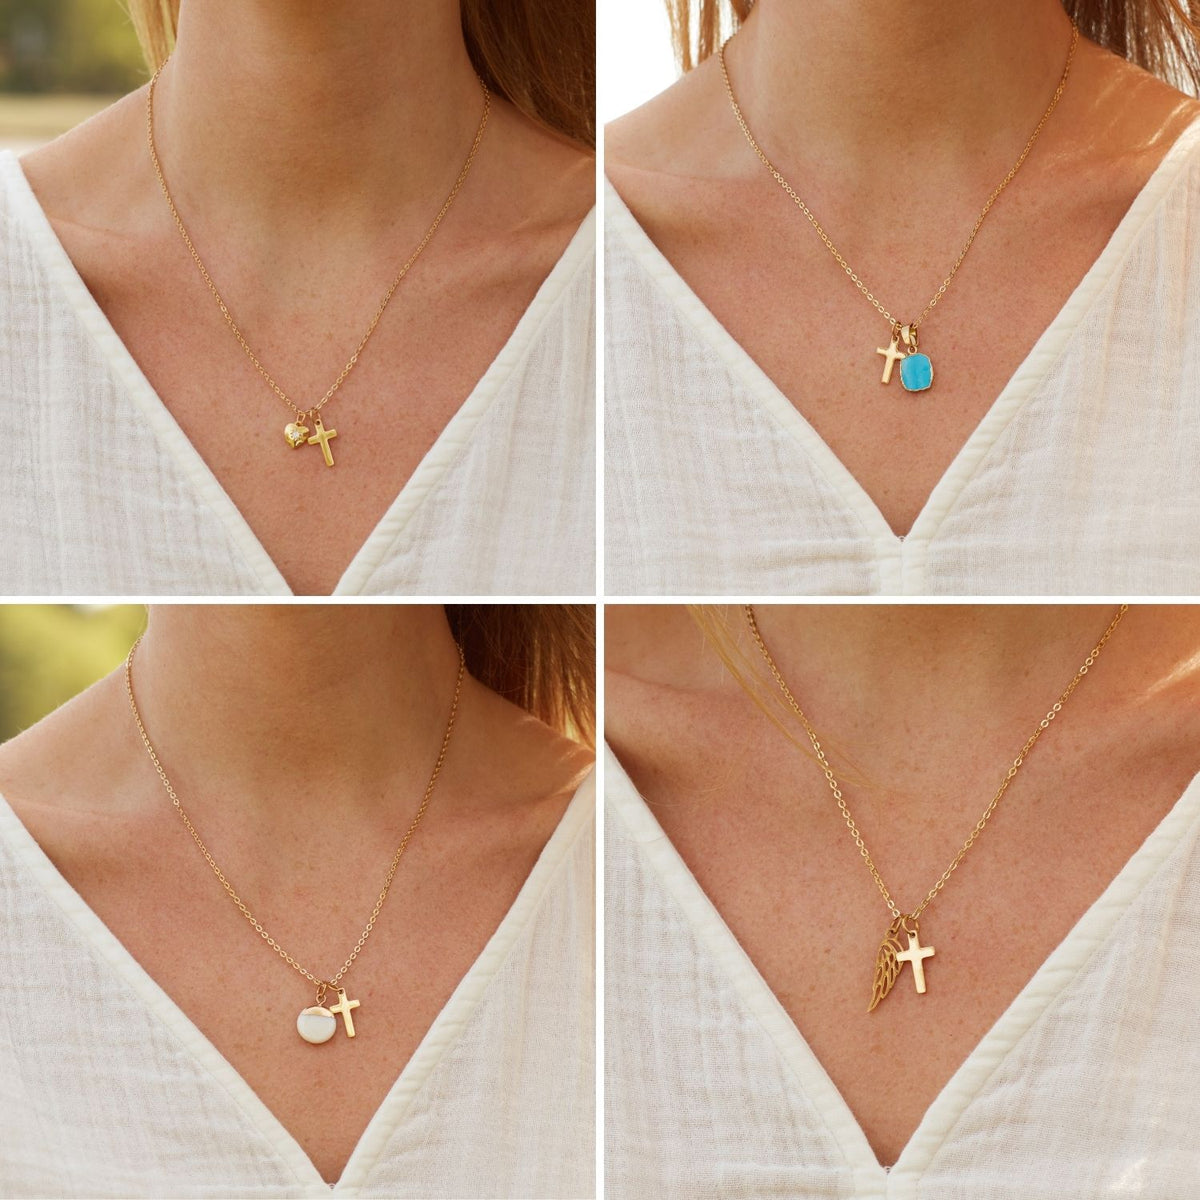 Dear Sister | Night to My Day | Cross Necklace